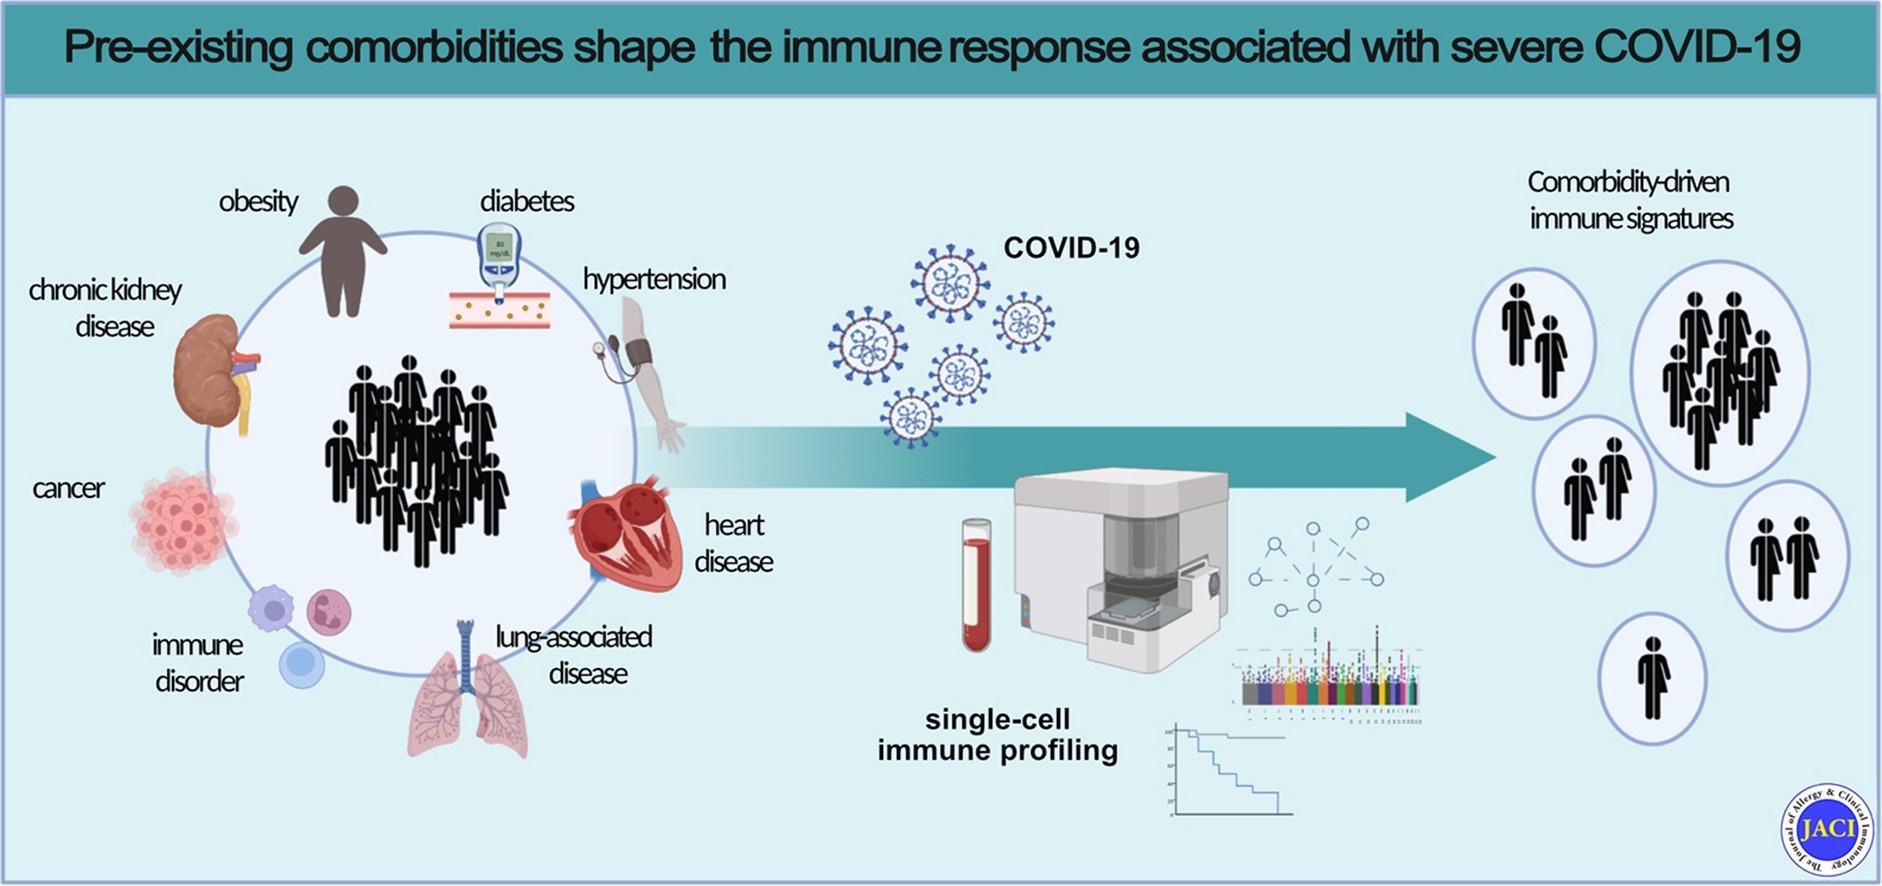 Pre-existing comorbidities shape the immune response associated with severe COVID-19